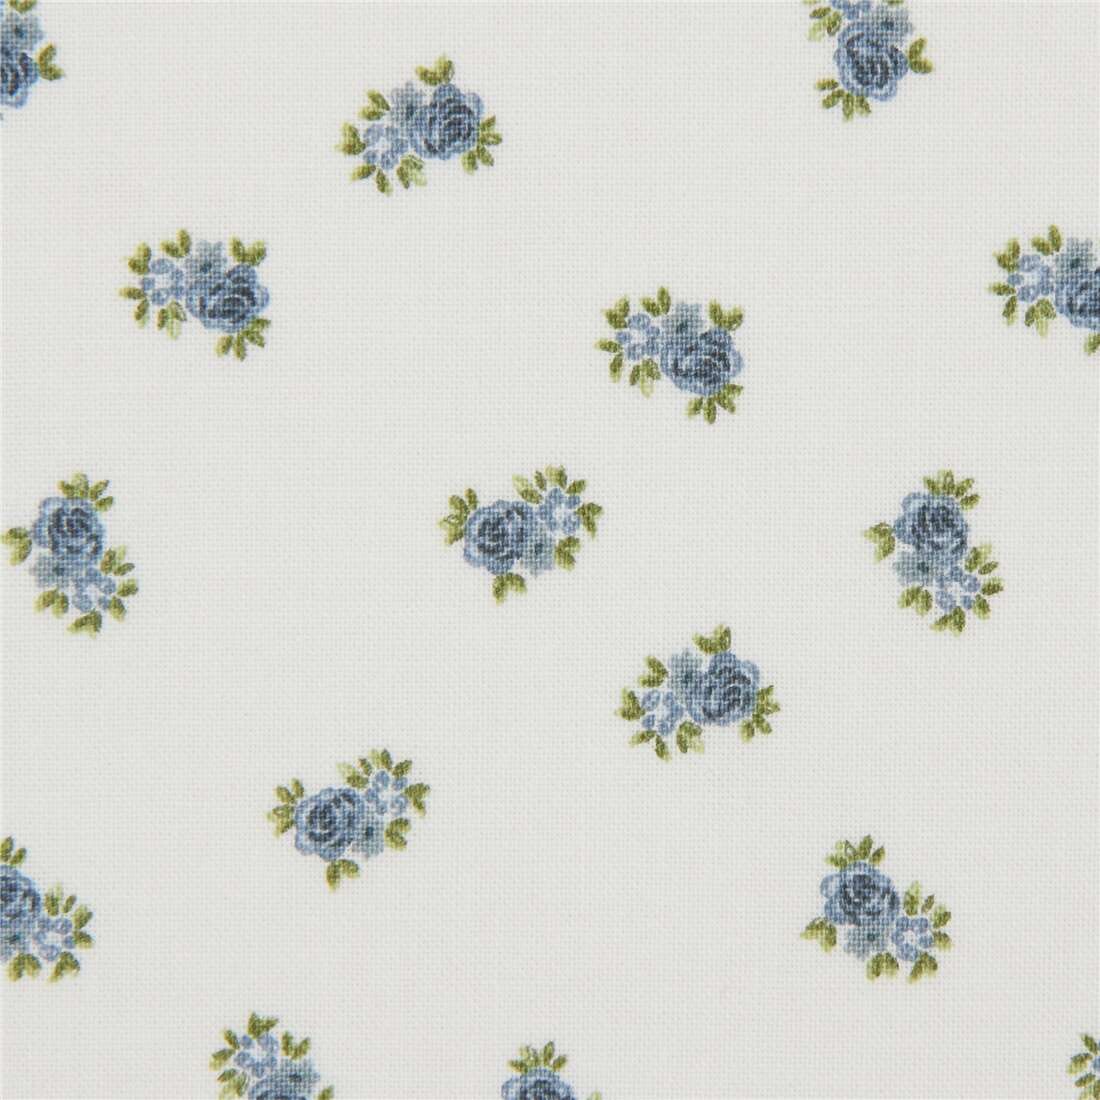 100% Cotton Quilting craft Fabric Blue Tiny Floral On White By Stof 